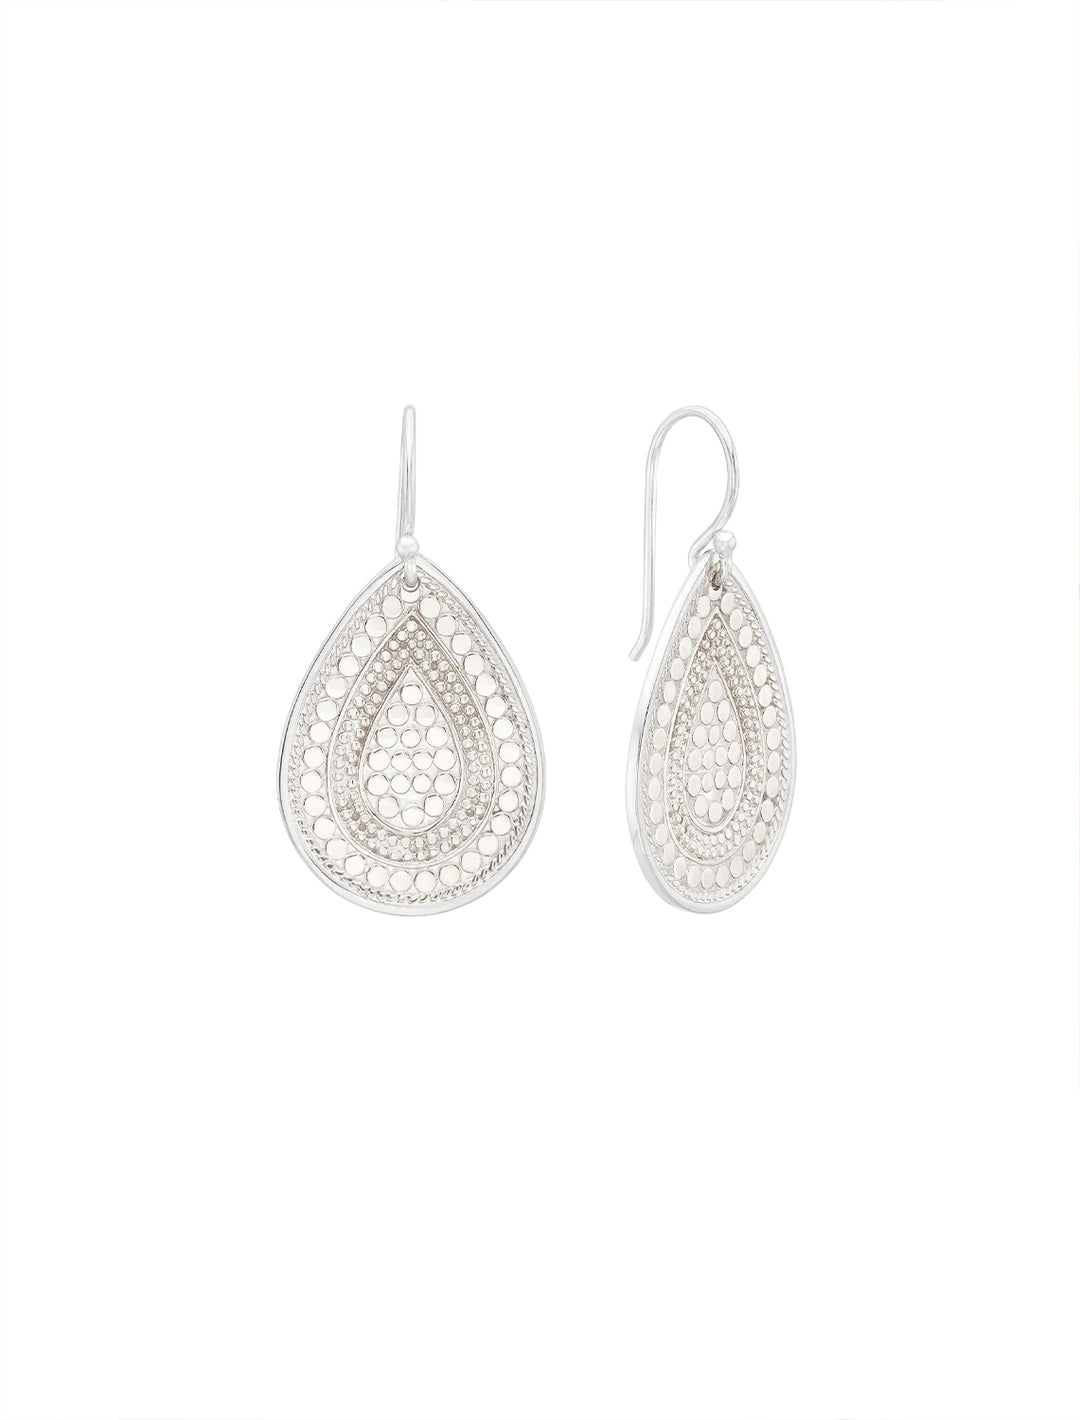 Front view of Anna Beck's beaded teardrop earrings in silver.